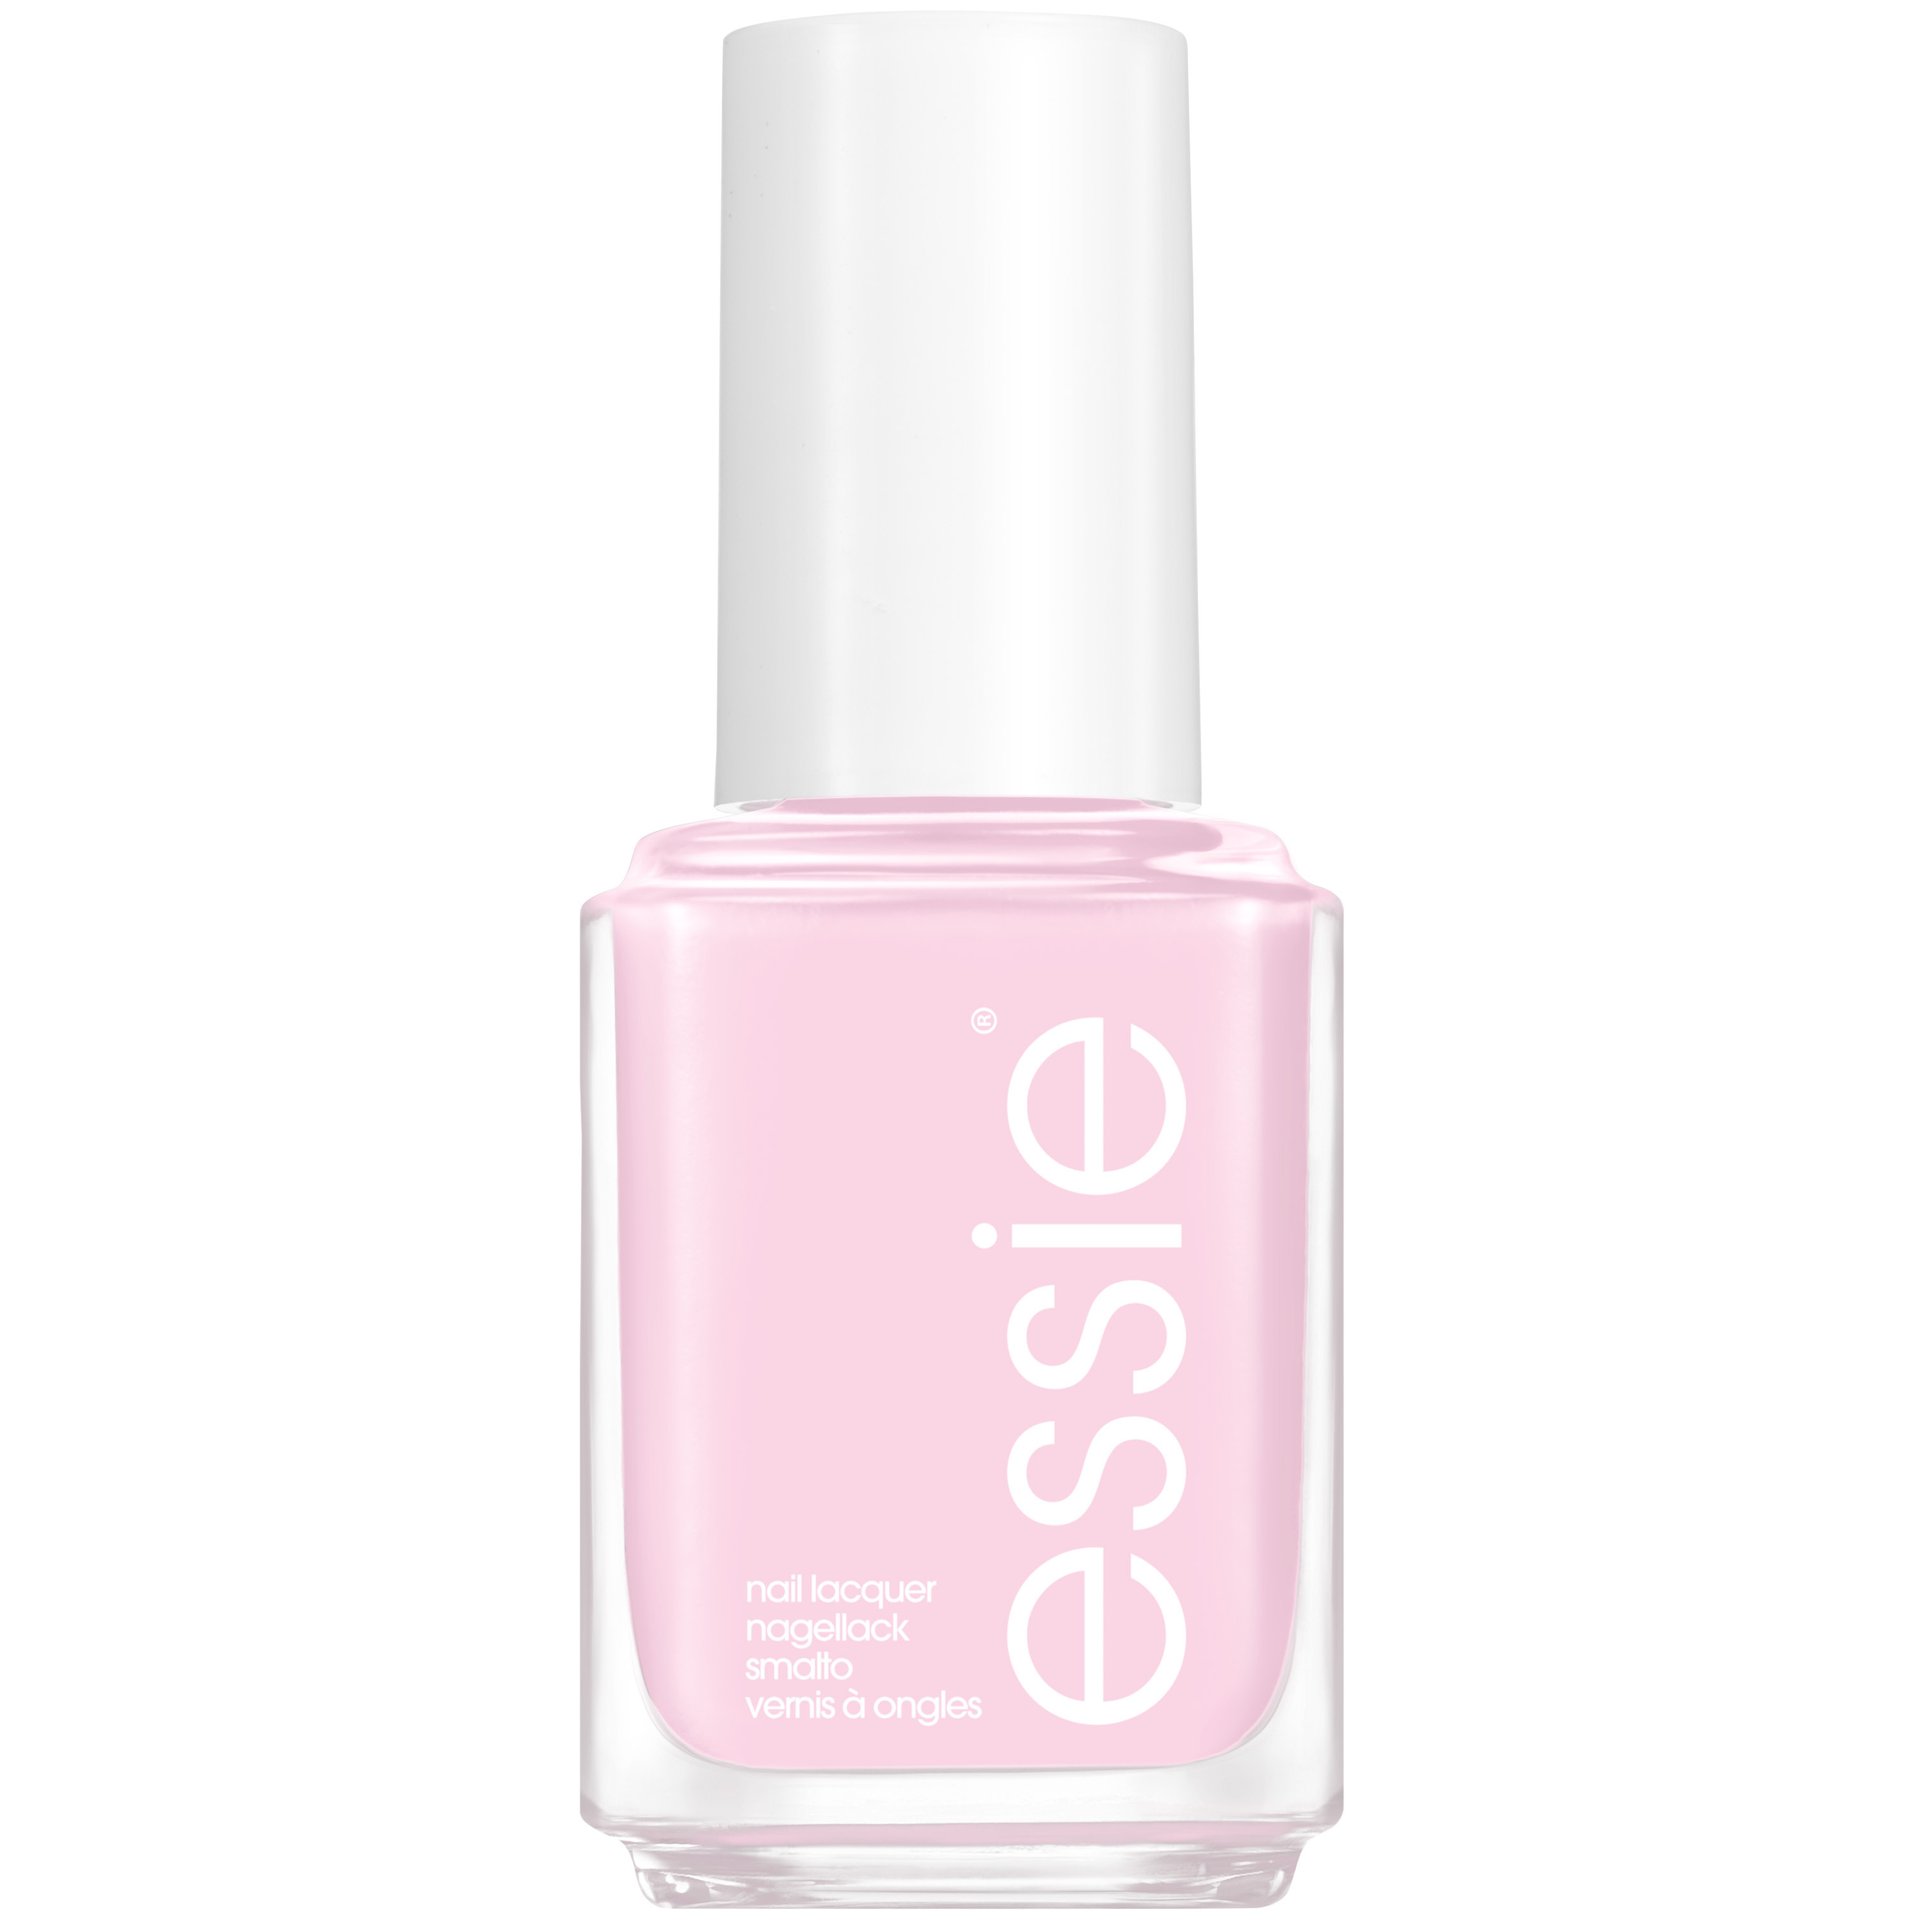 stretch your wings - pink pastel nail polish & lacquer - essie